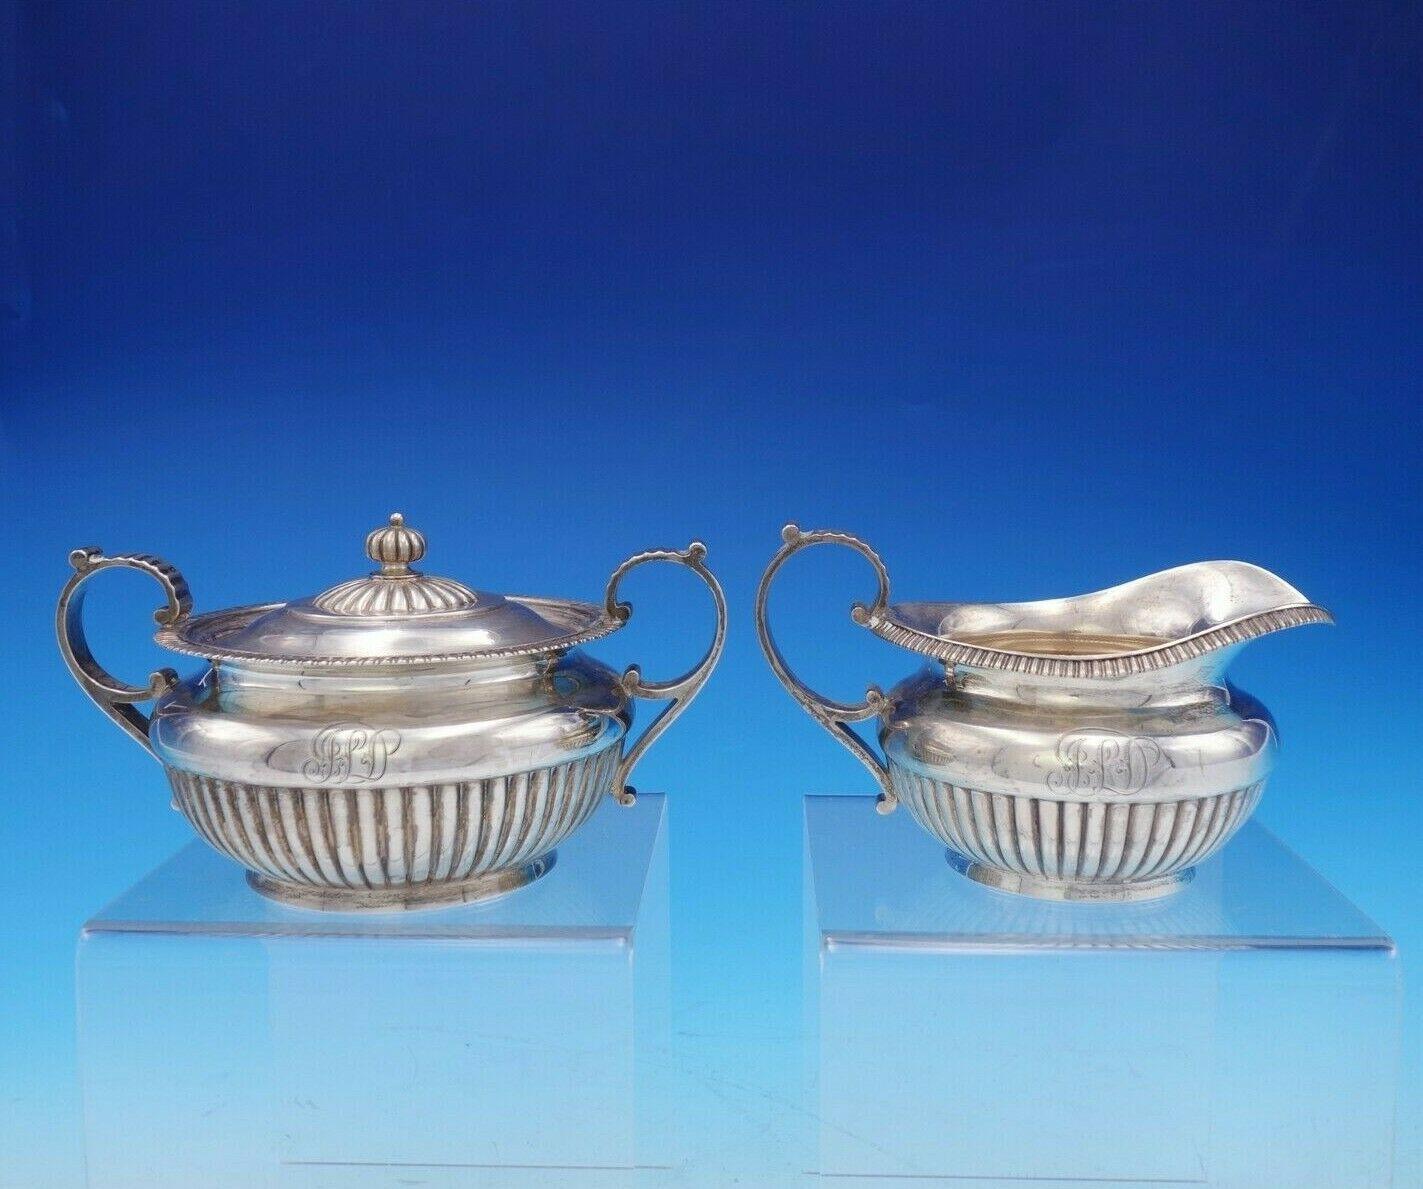 20th Century Dominick and Haff Sterling Silver Tea Set 5-Piece with Wood #134, circa 1884